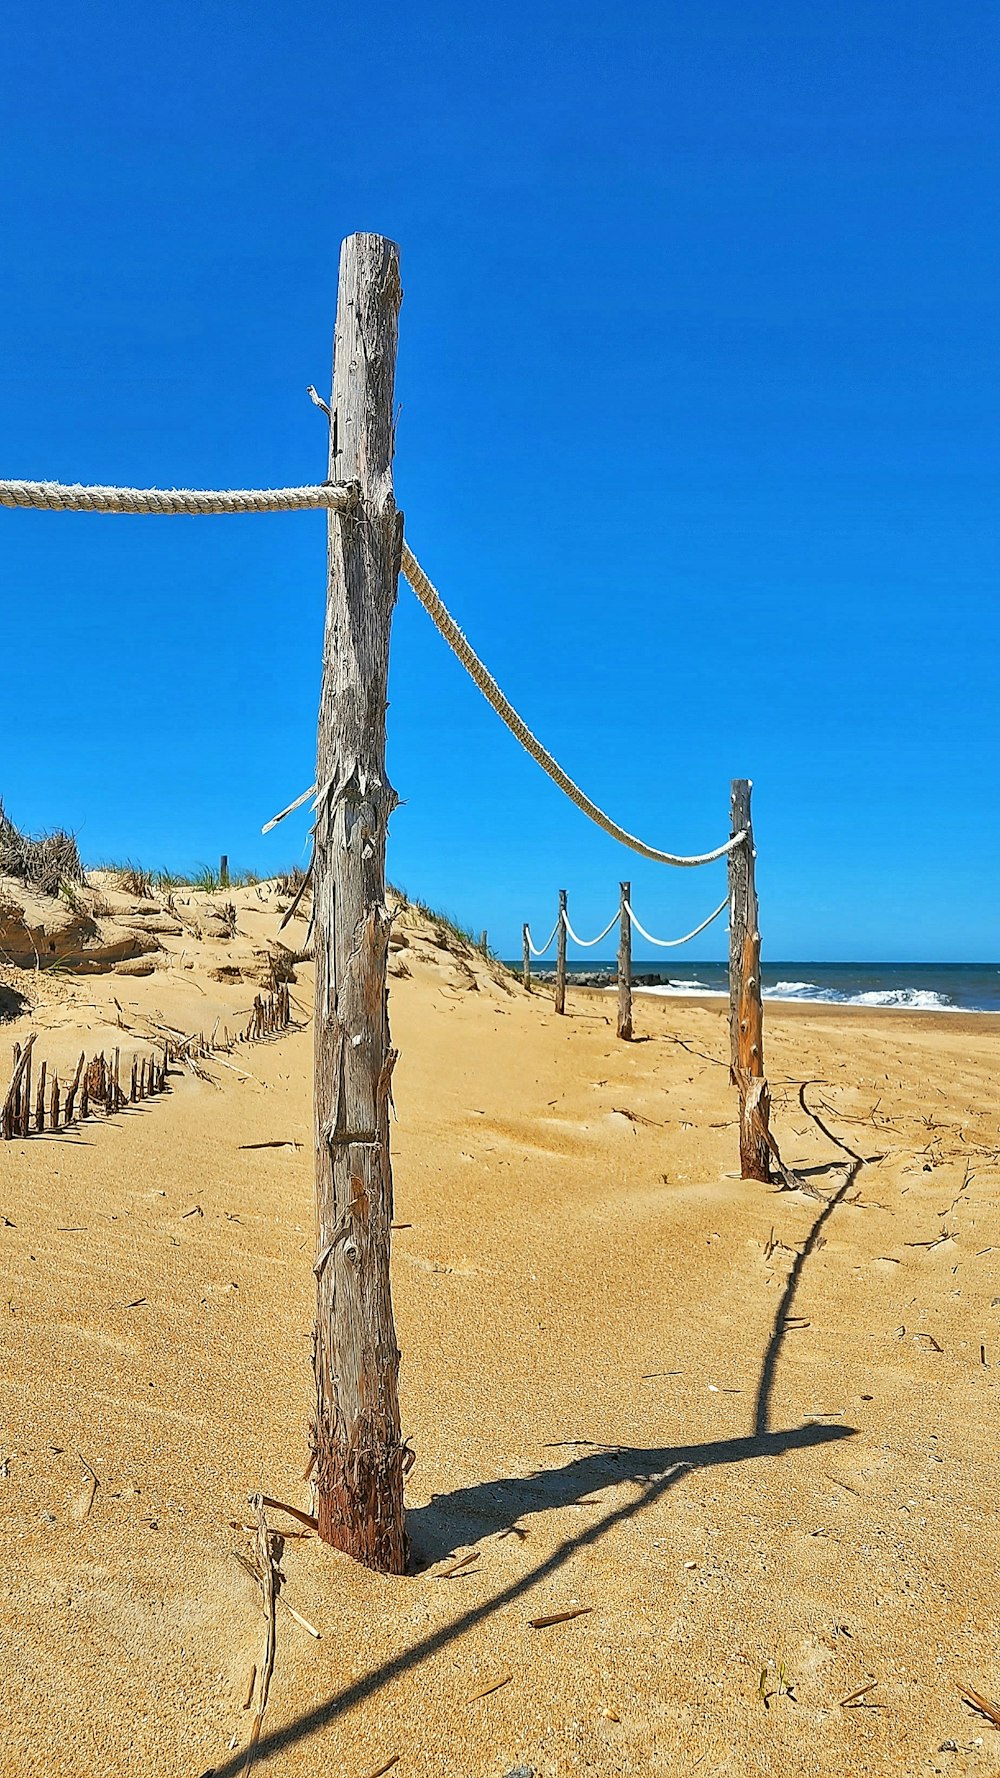 a wooden post on a sandy beach next to the ocean